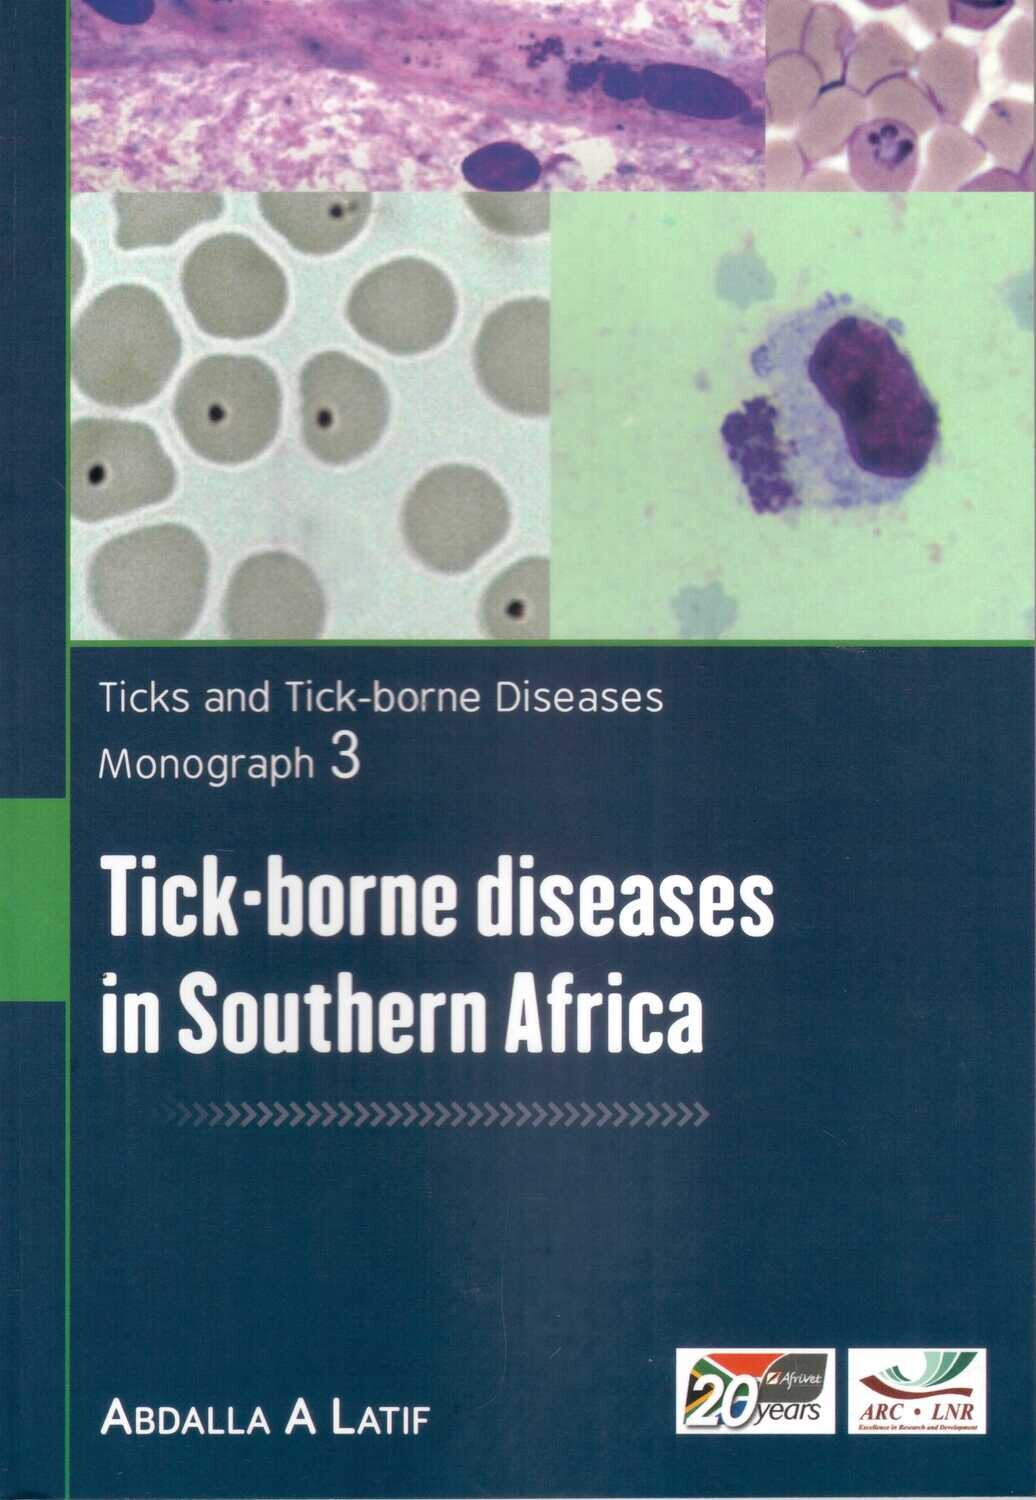 Tick-borne diseases in Southern Africa